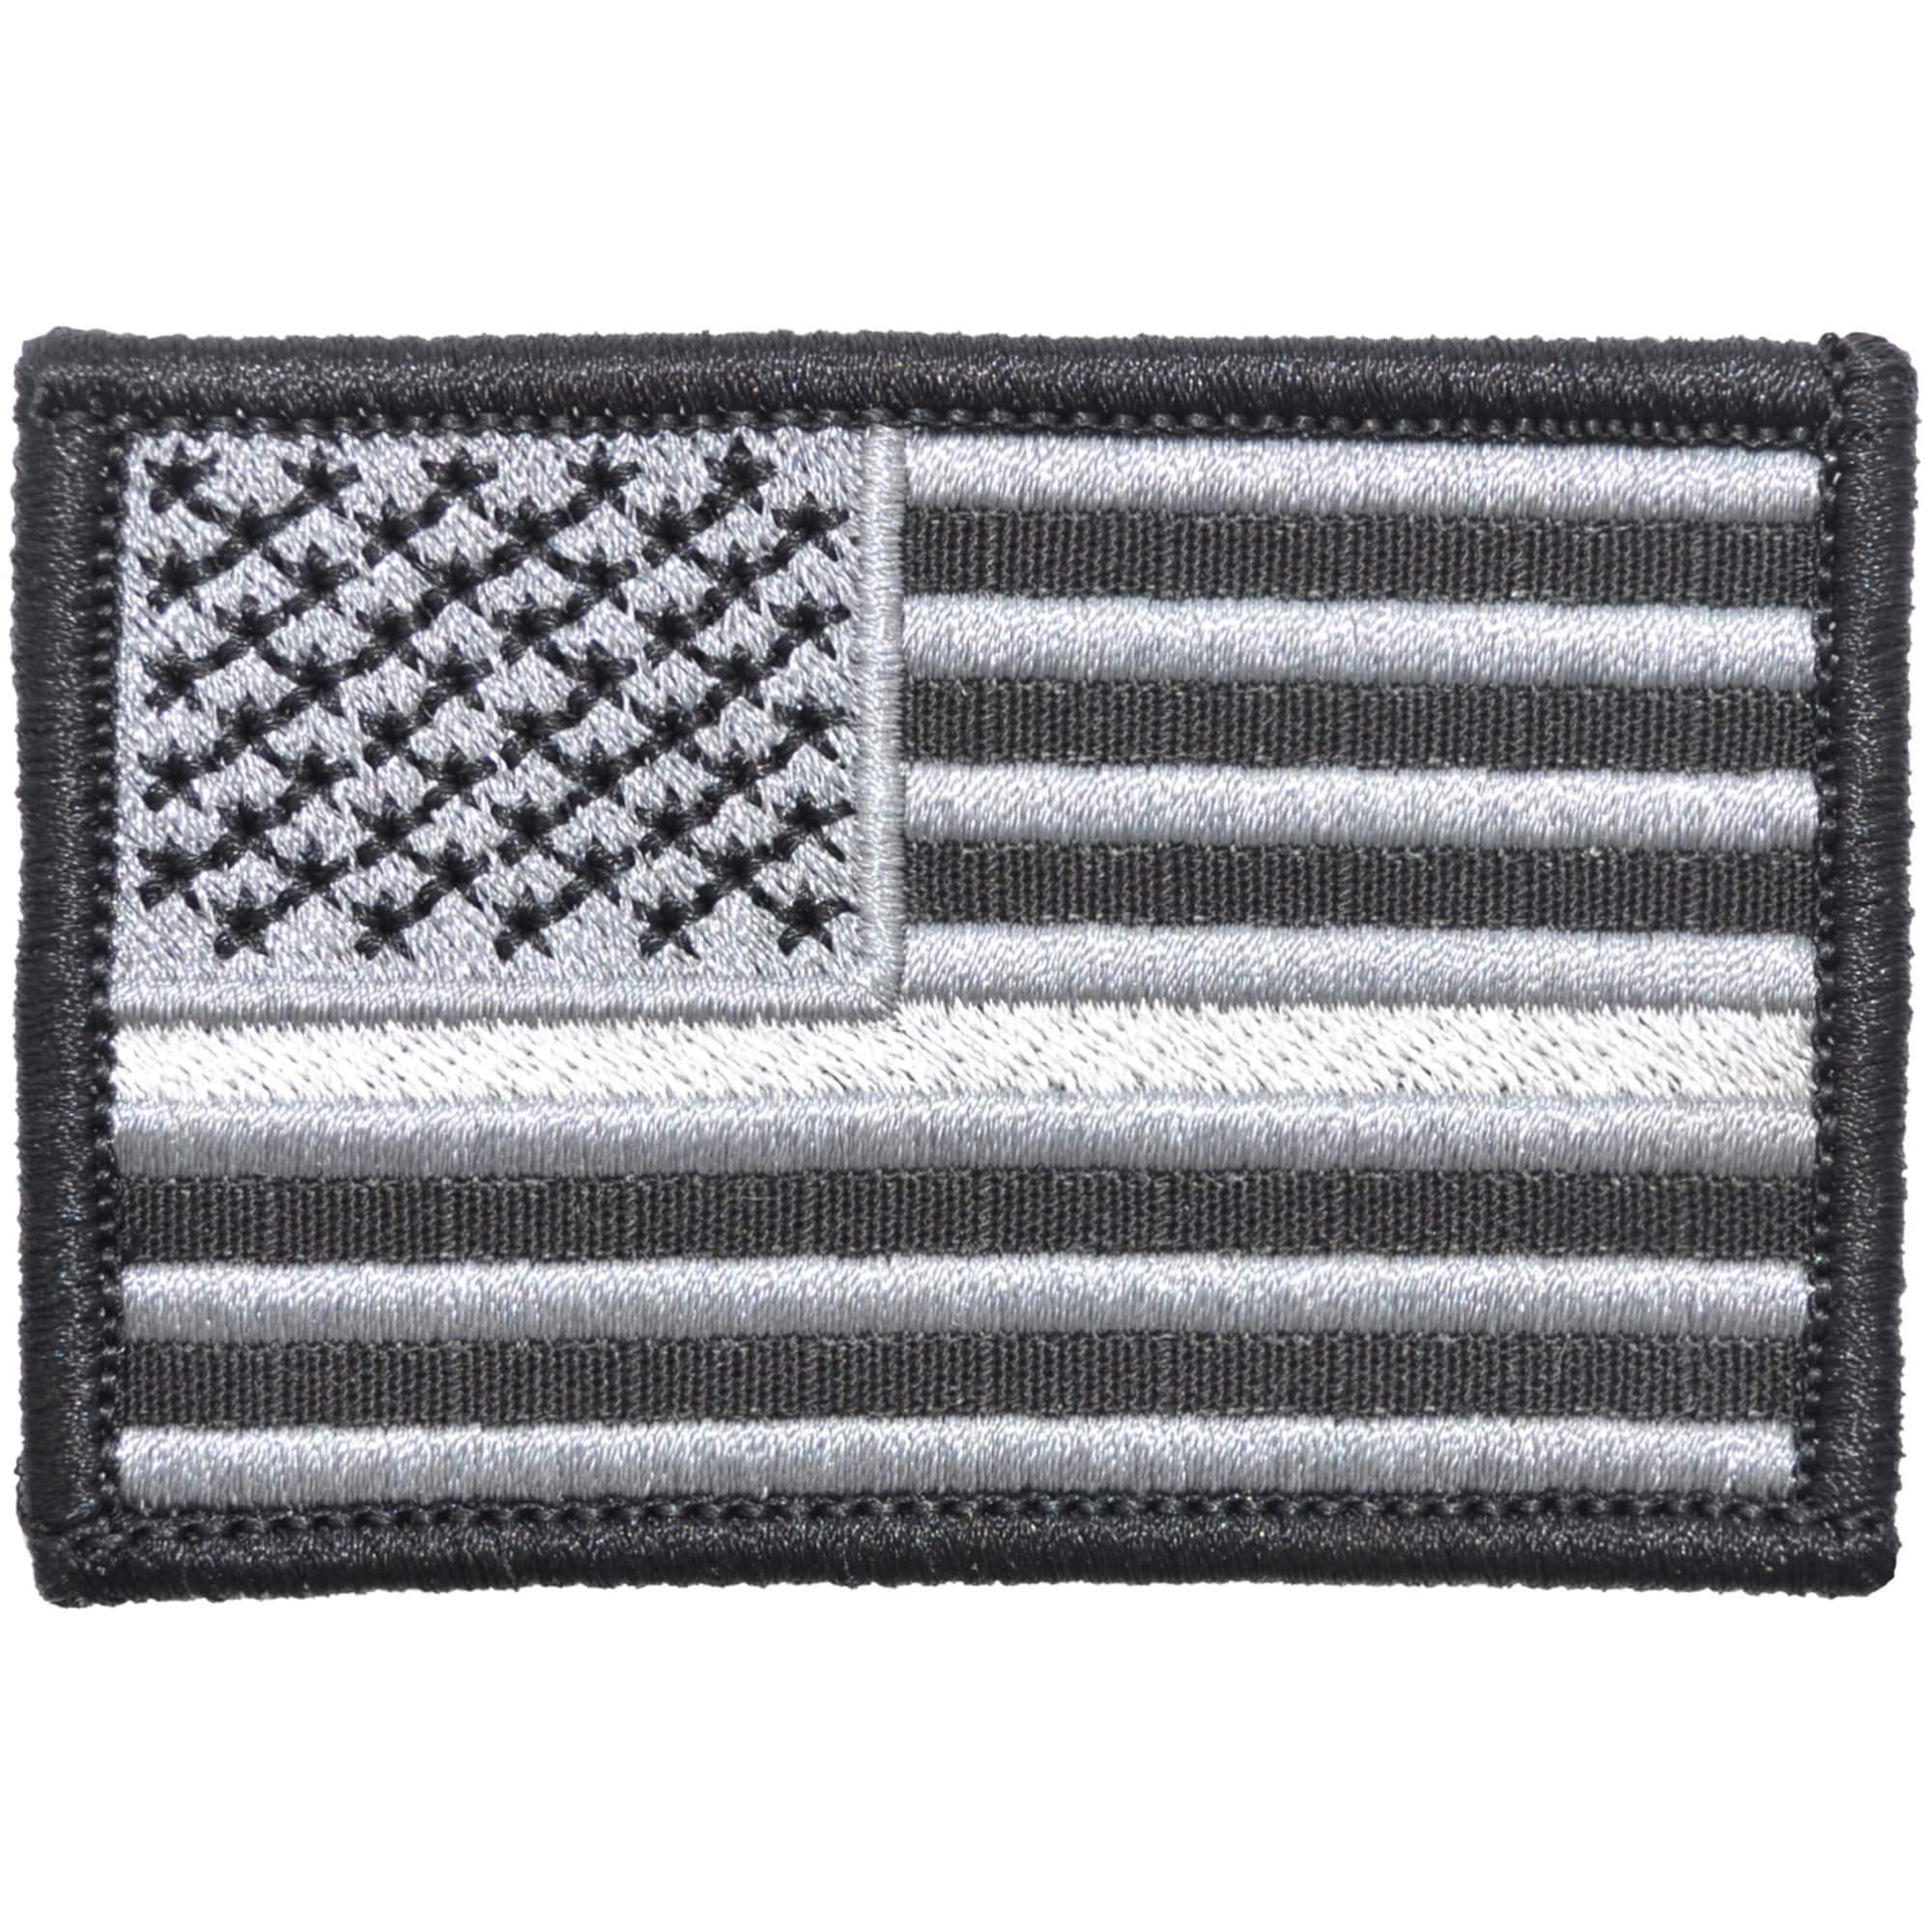 Tactical Gear Junkie Patches Black Thin Silver Line Corrections USA Flag - 2x3 Patch